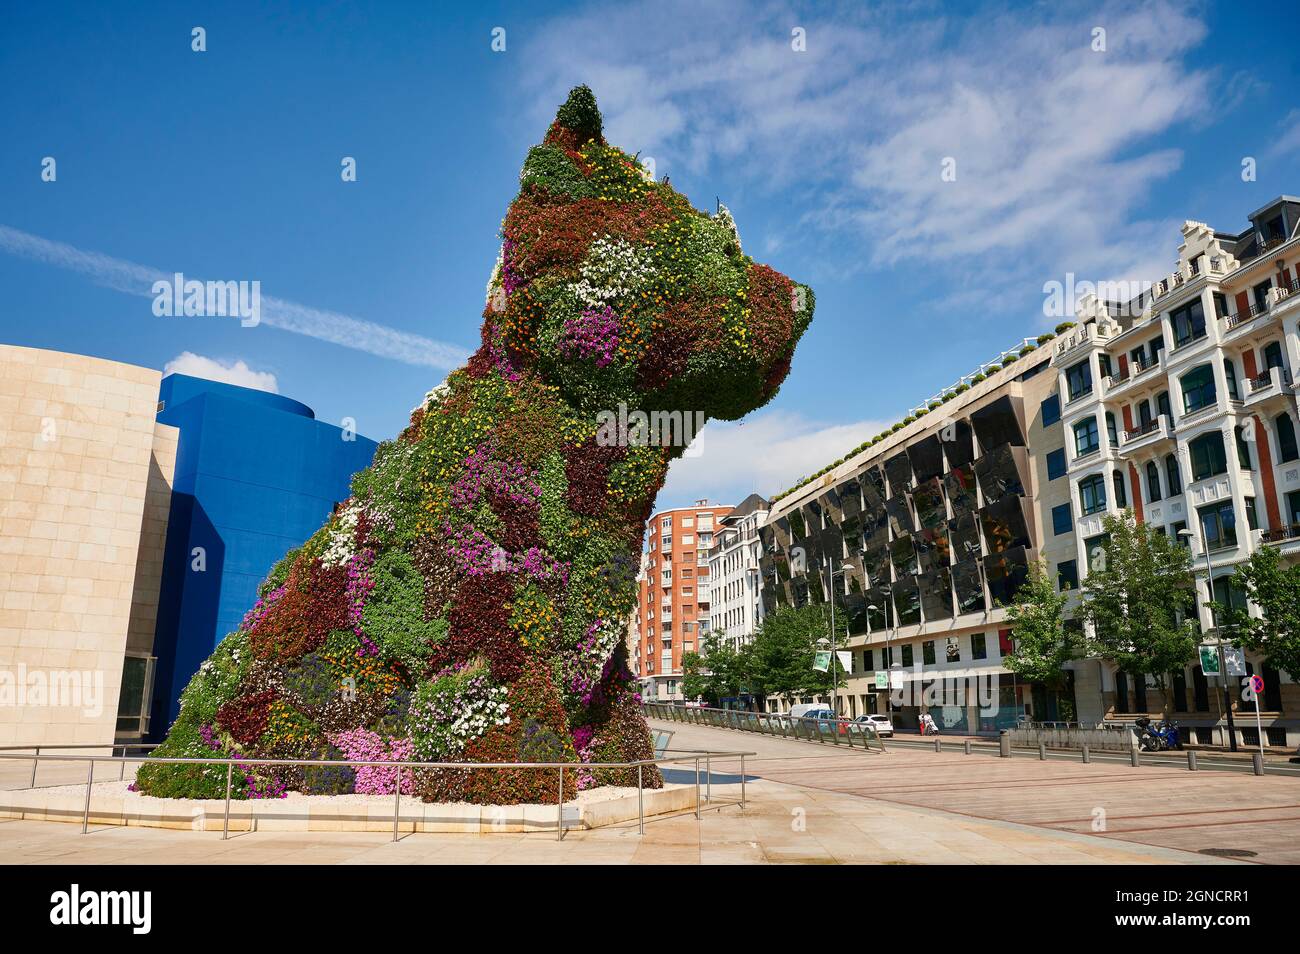 View of the 'Puppy' the famous sculpture by Jeff Koons in the outdoors of the Guggenheim museum, Bilbao, Biscay, Basque Country Stock Photo